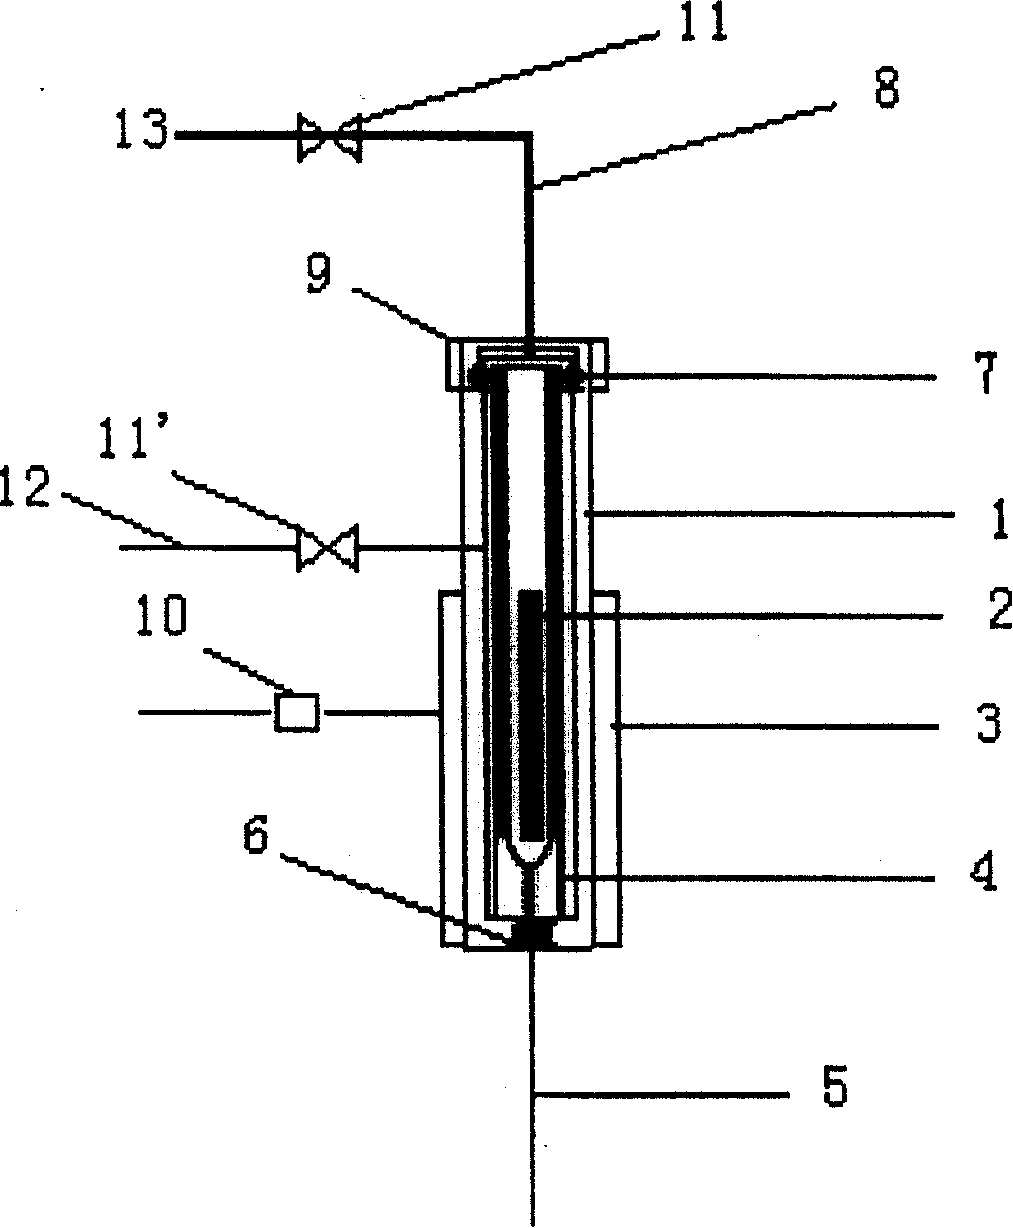 Apparatus used for solid absorption stirrer thermal analyzer